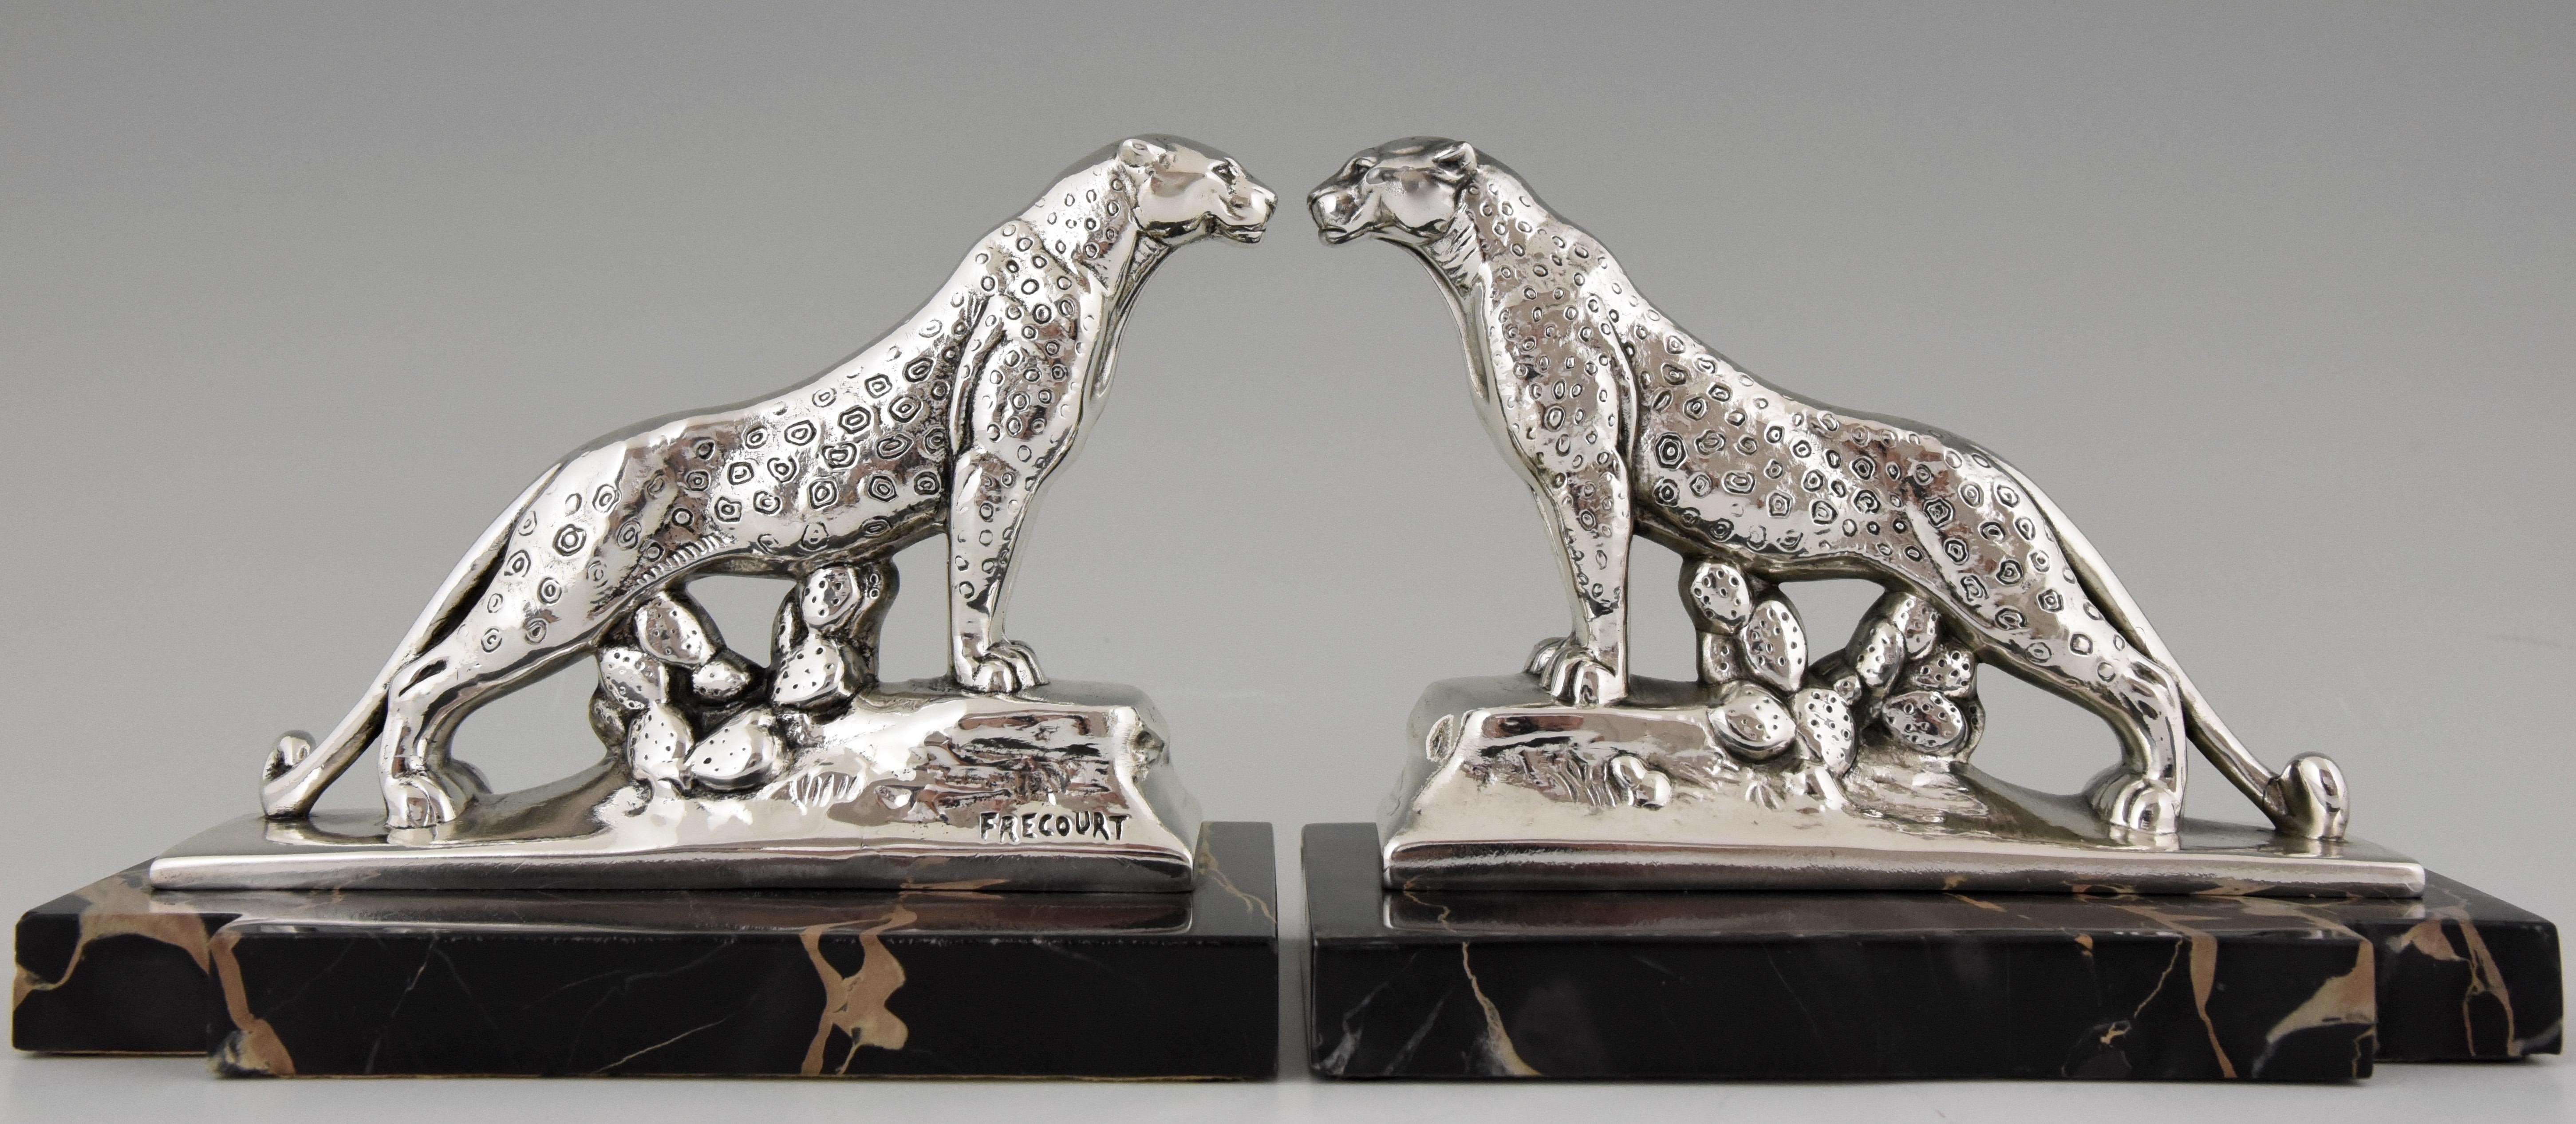 Stylish pair of Art Deco silvered panther bookends signed by the French artist Maurice Frecourt, circa 1930. The sculptures are mounted on fine Portor marble bases.